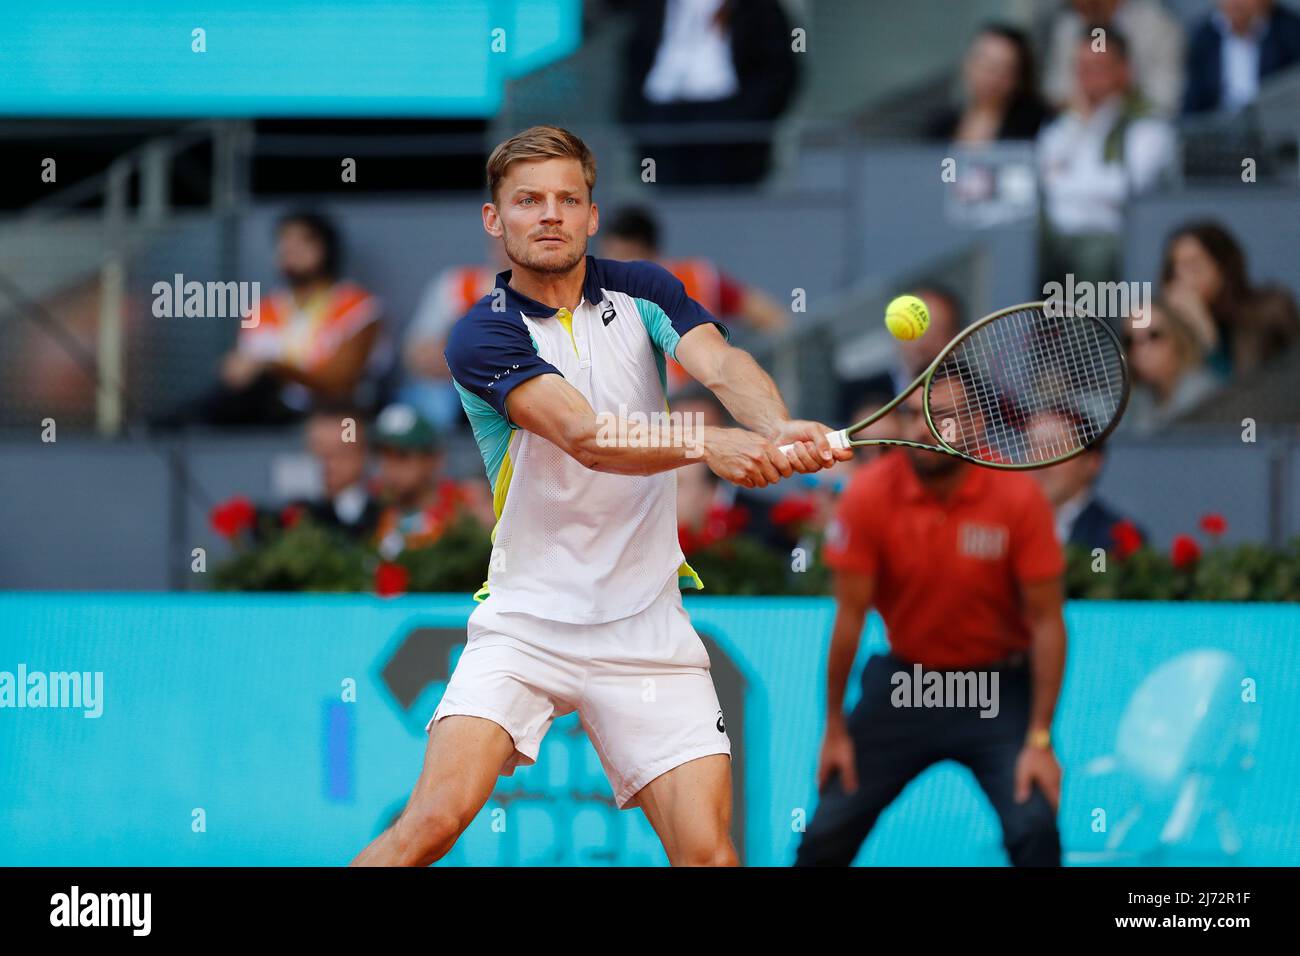 David Goffin (BEL), MAY 5, 2022 - Tennis : David Goffin during singles 3rd round match against Nafael Nadal on the ATP tour Masters 1000 'Mutua Madrid Open tennis tournament' at the Caja Magica in Madrid, Spain. (Photo by Mutsu Kawamori/AFLO) Stock Photo